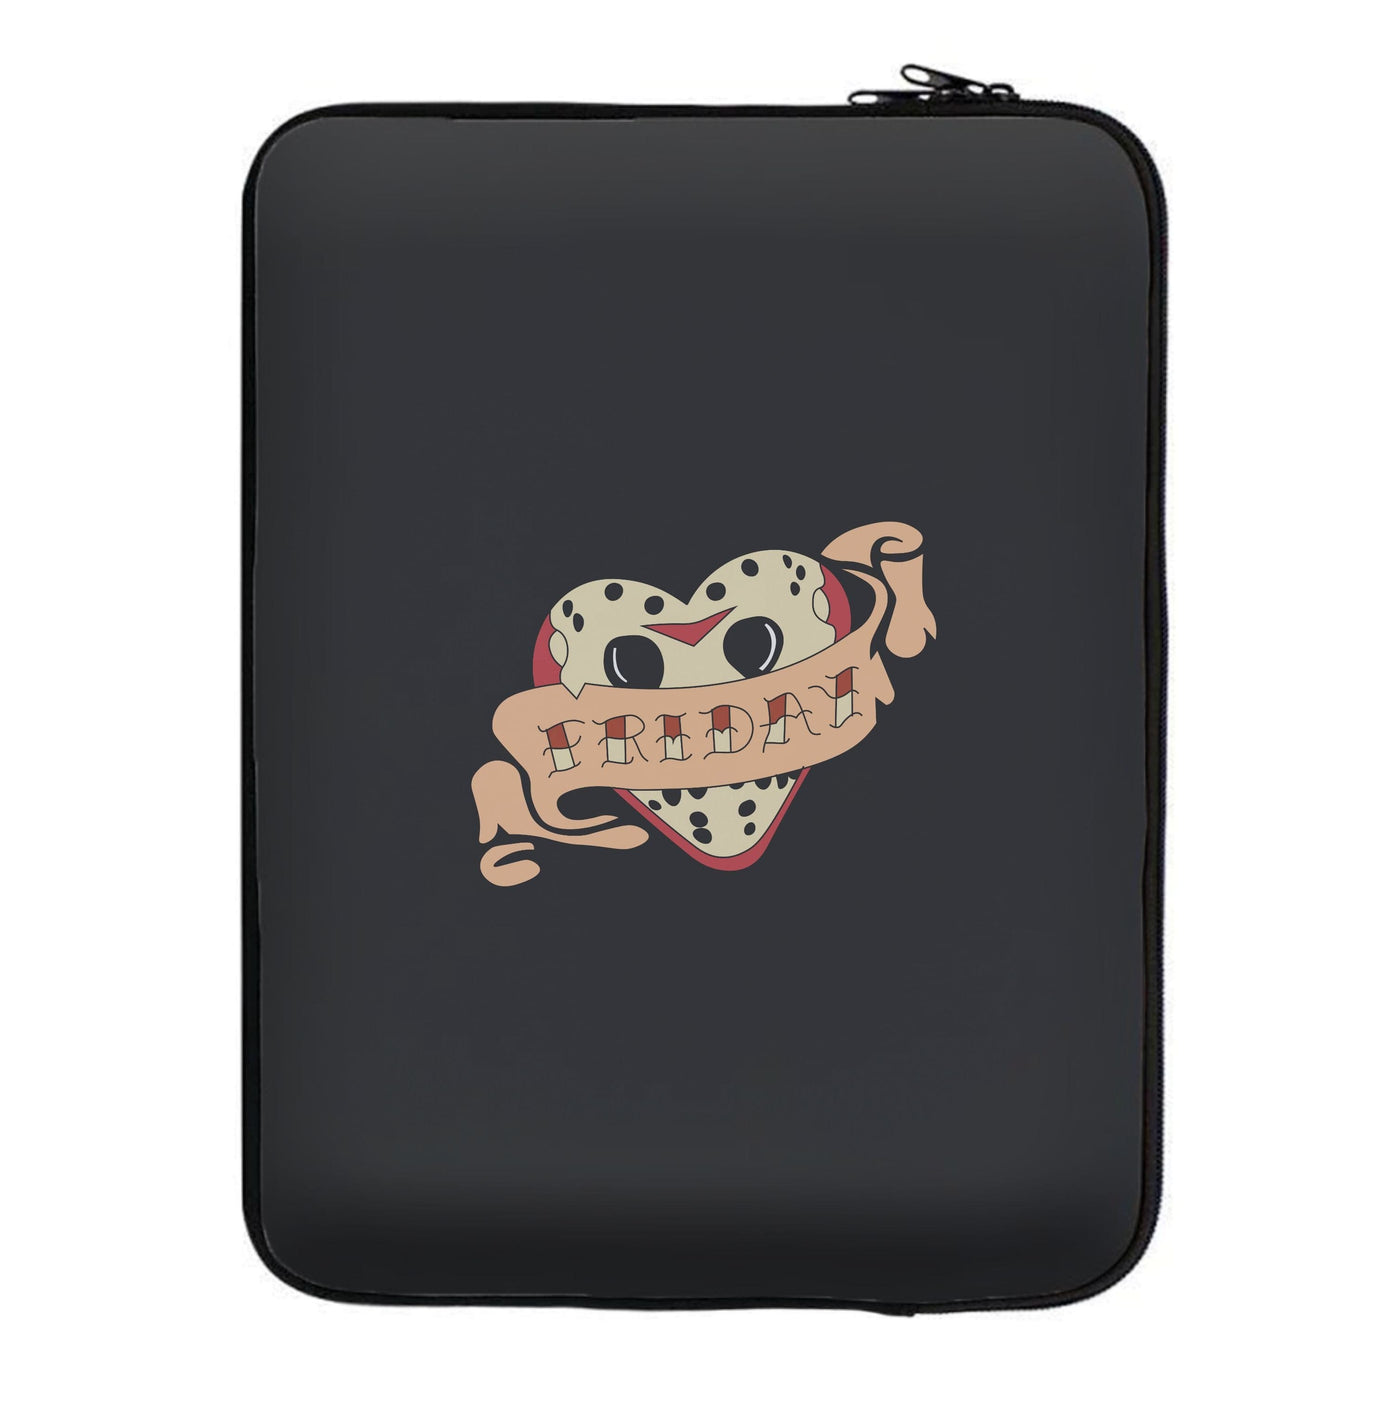 Friday - Friday The 13th Laptop Sleeve